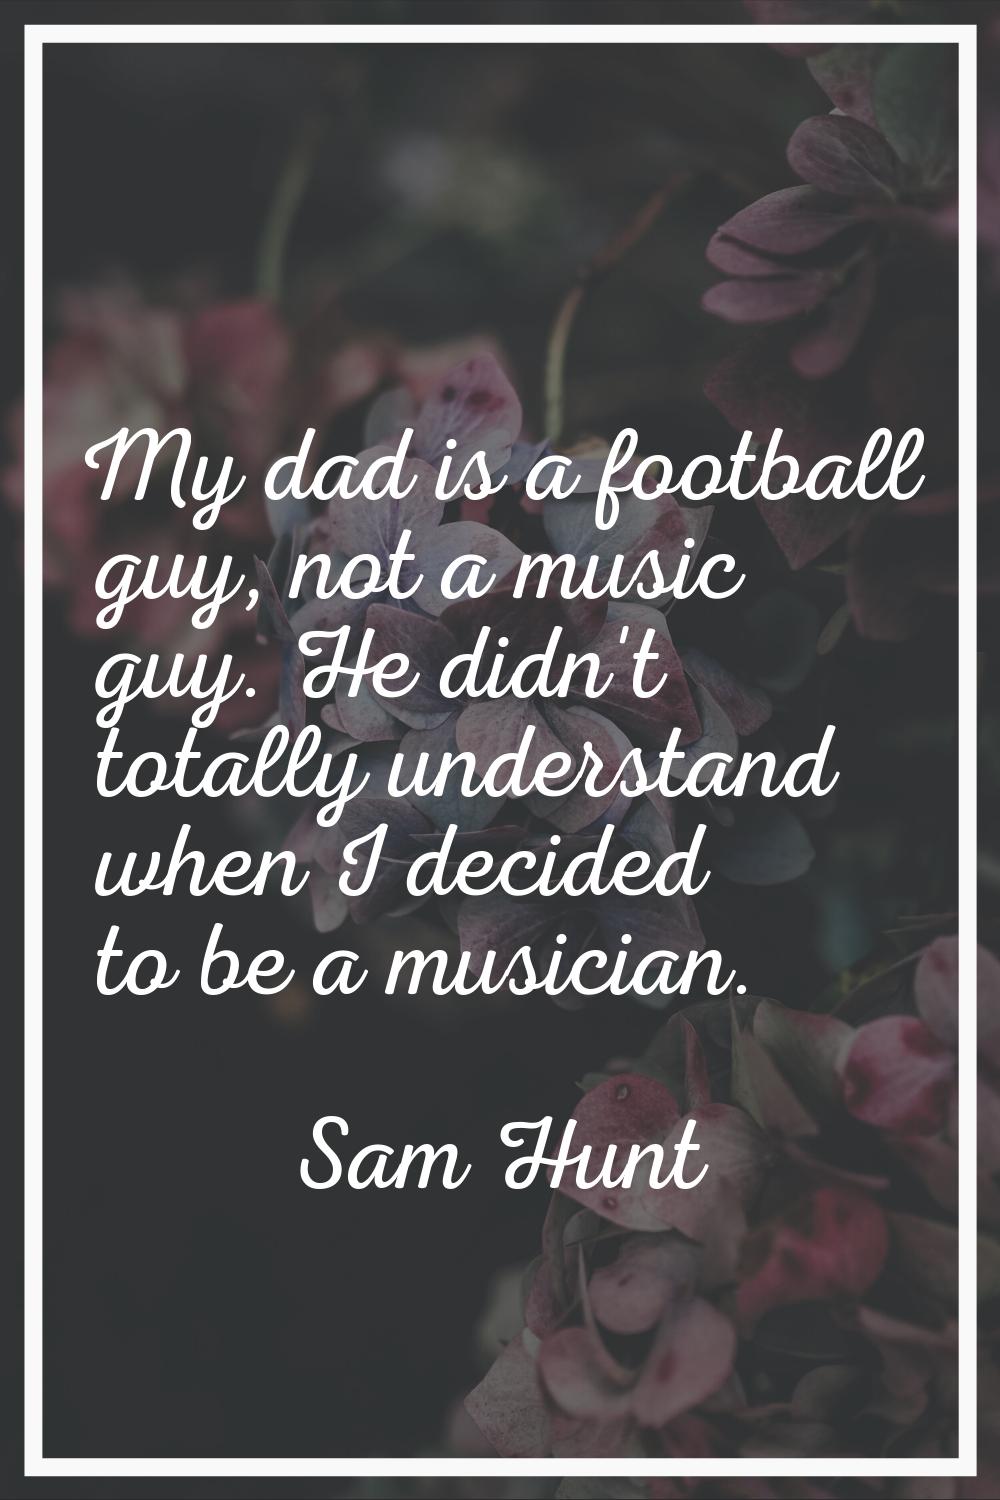 My dad is a football guy, not a music guy. He didn't totally understand when I decided to be a musi